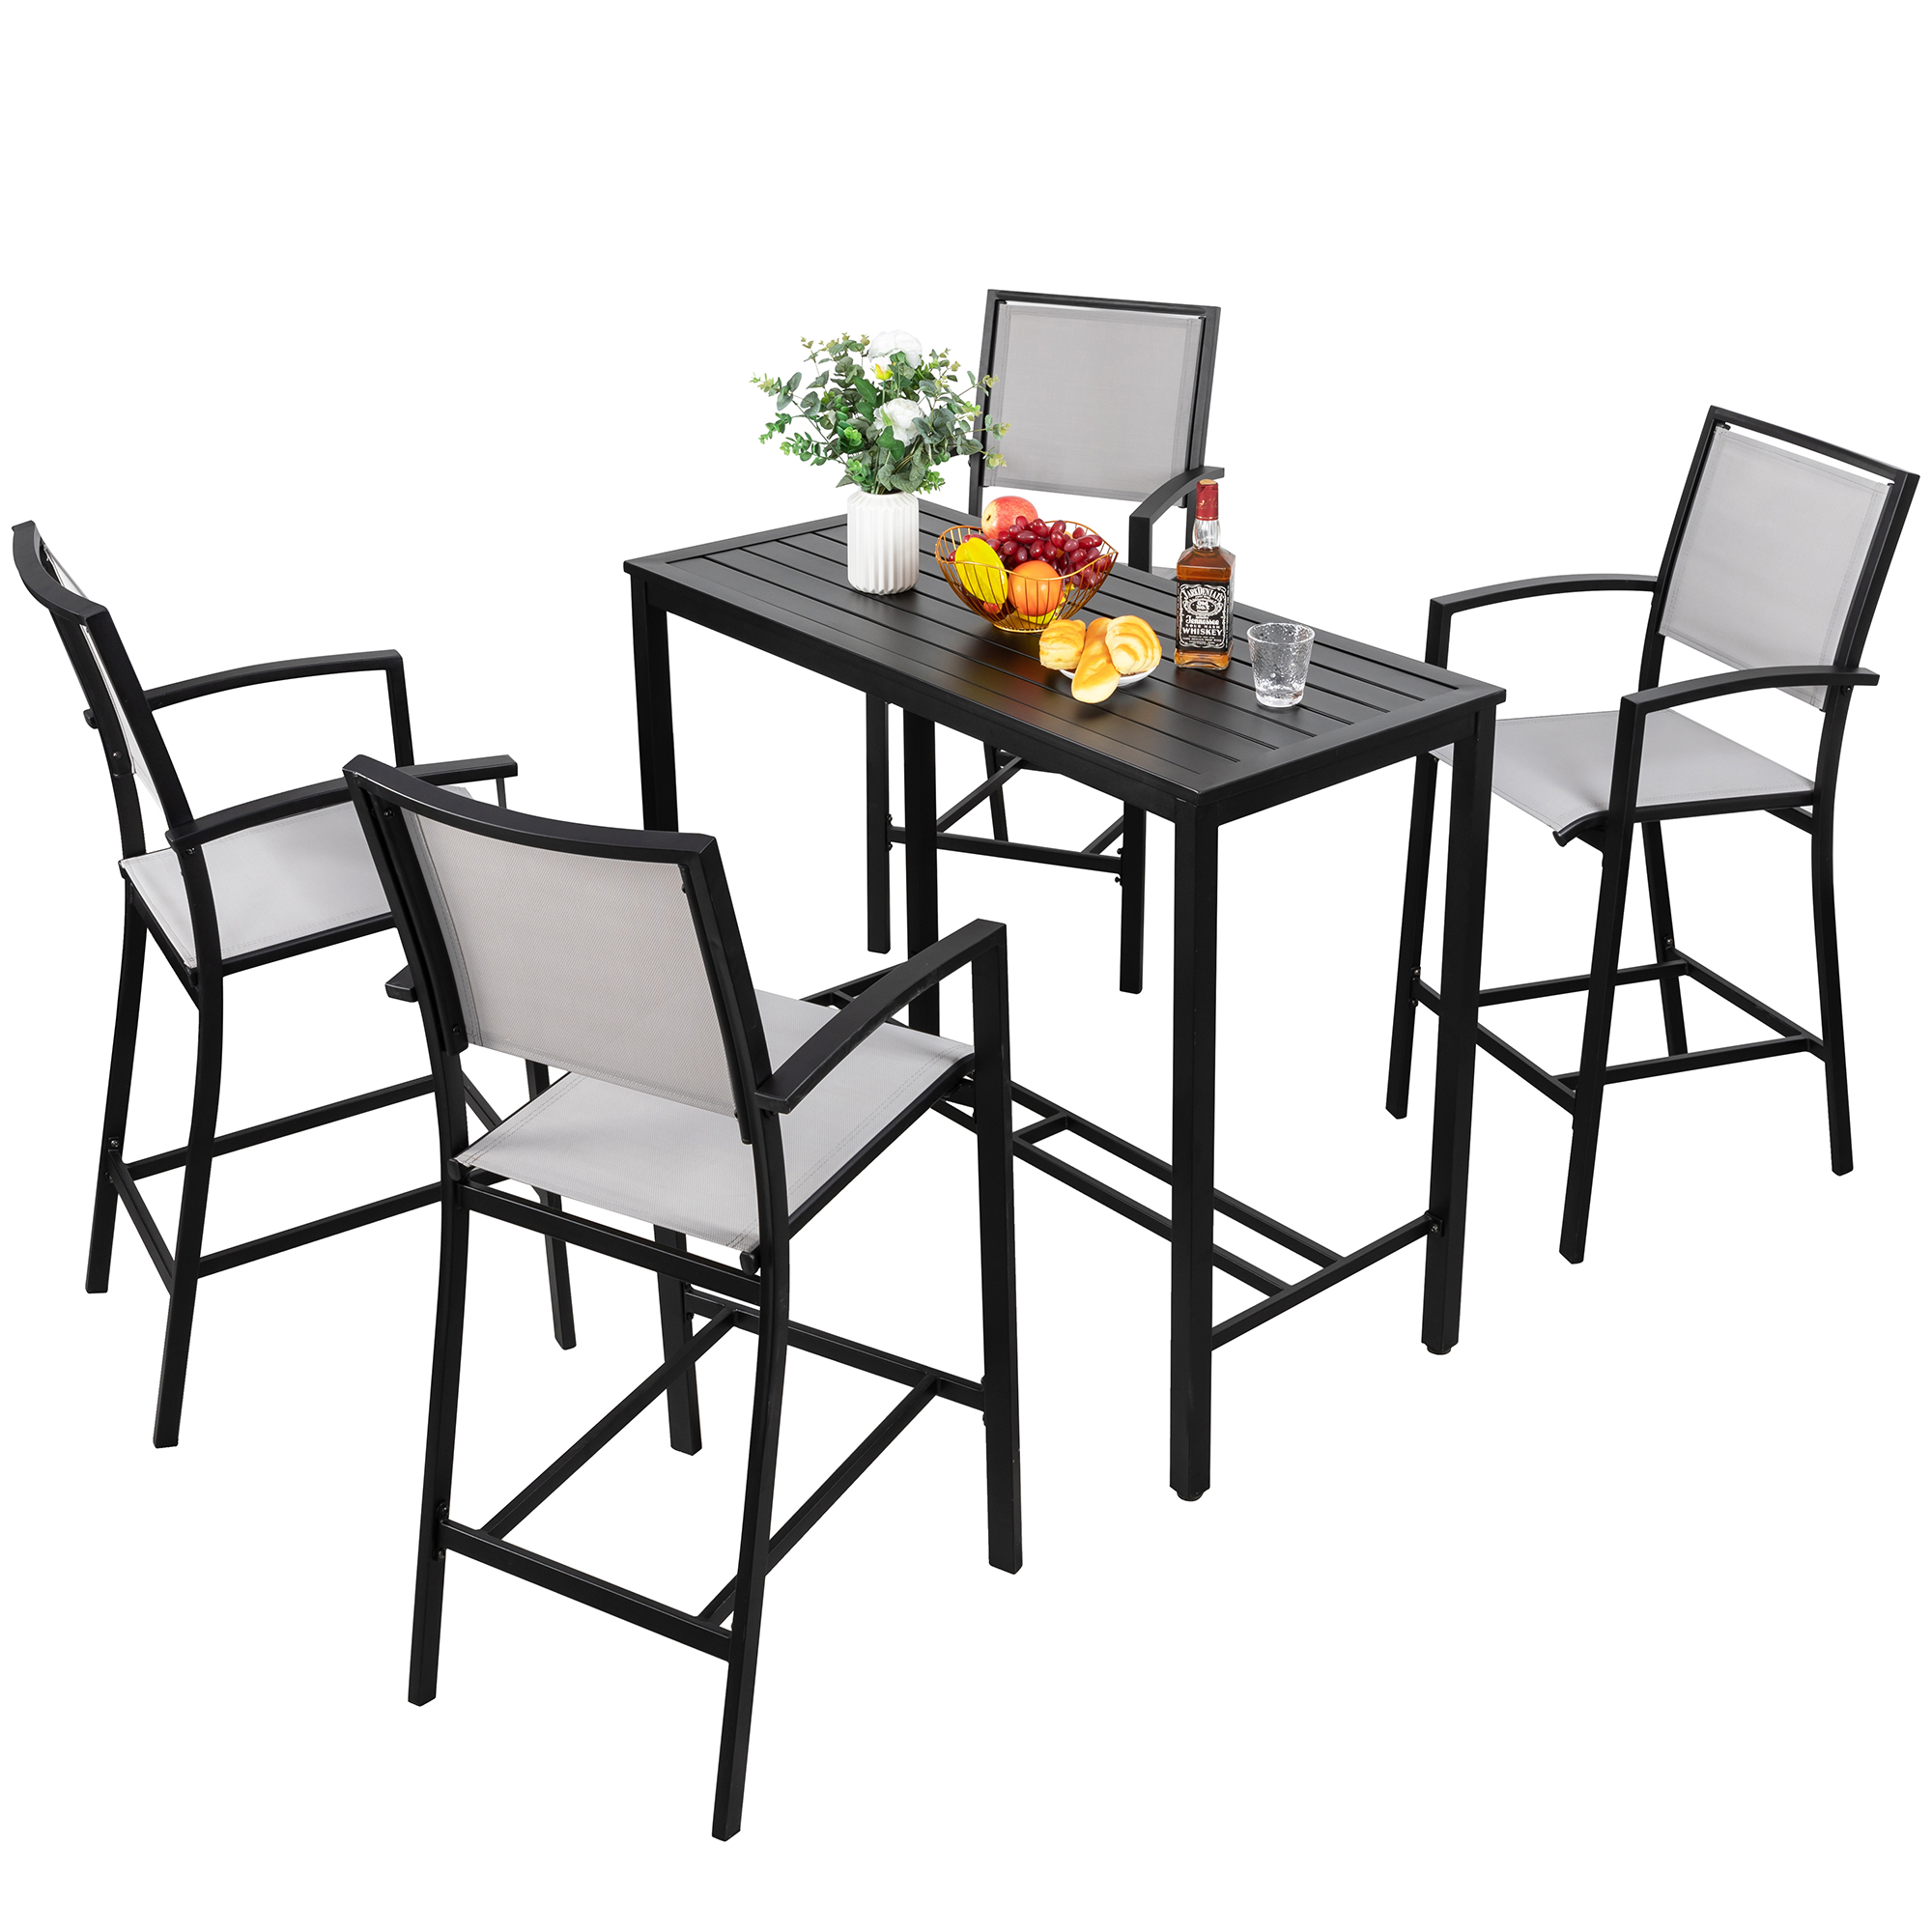 Walsunny 5 Piece Patio High Bar Set, Outdoor Bistro Set All Weather Metal Textilene Patio Dining Set Stools Chair of 4 and Bar Table Gray - image 1 of 7